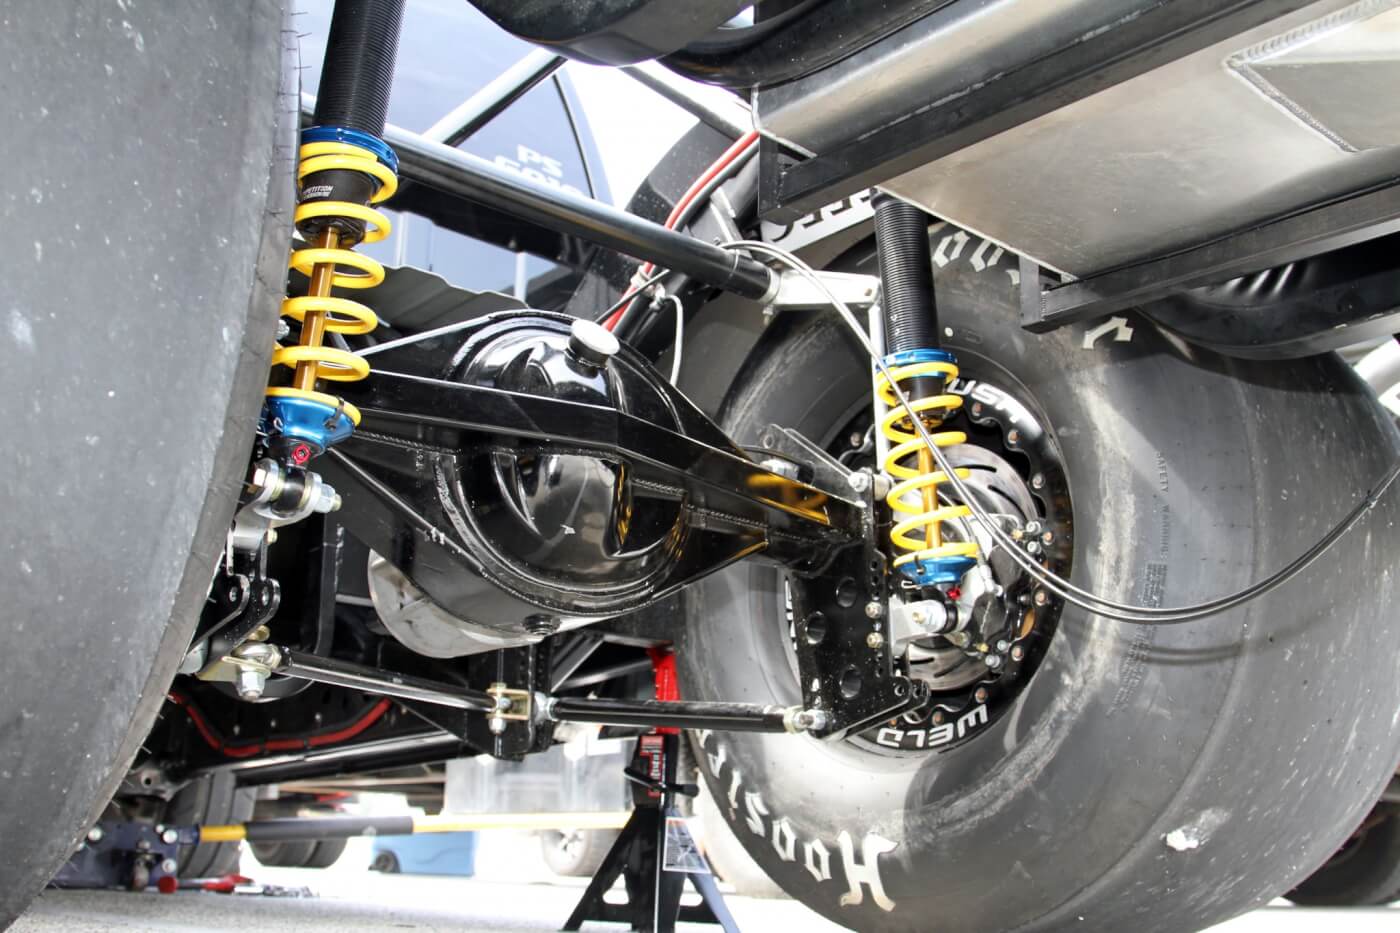 The new frame rails and 4-link suspension were installed to make room for these huge Hoosier drag slicks that are necessary to put the power to the track. Notice the Strange Engineering Pro-Race 9.5 rear axle and Competition Suspension coil over shocks: this truck is built for one purpose—to go fast.